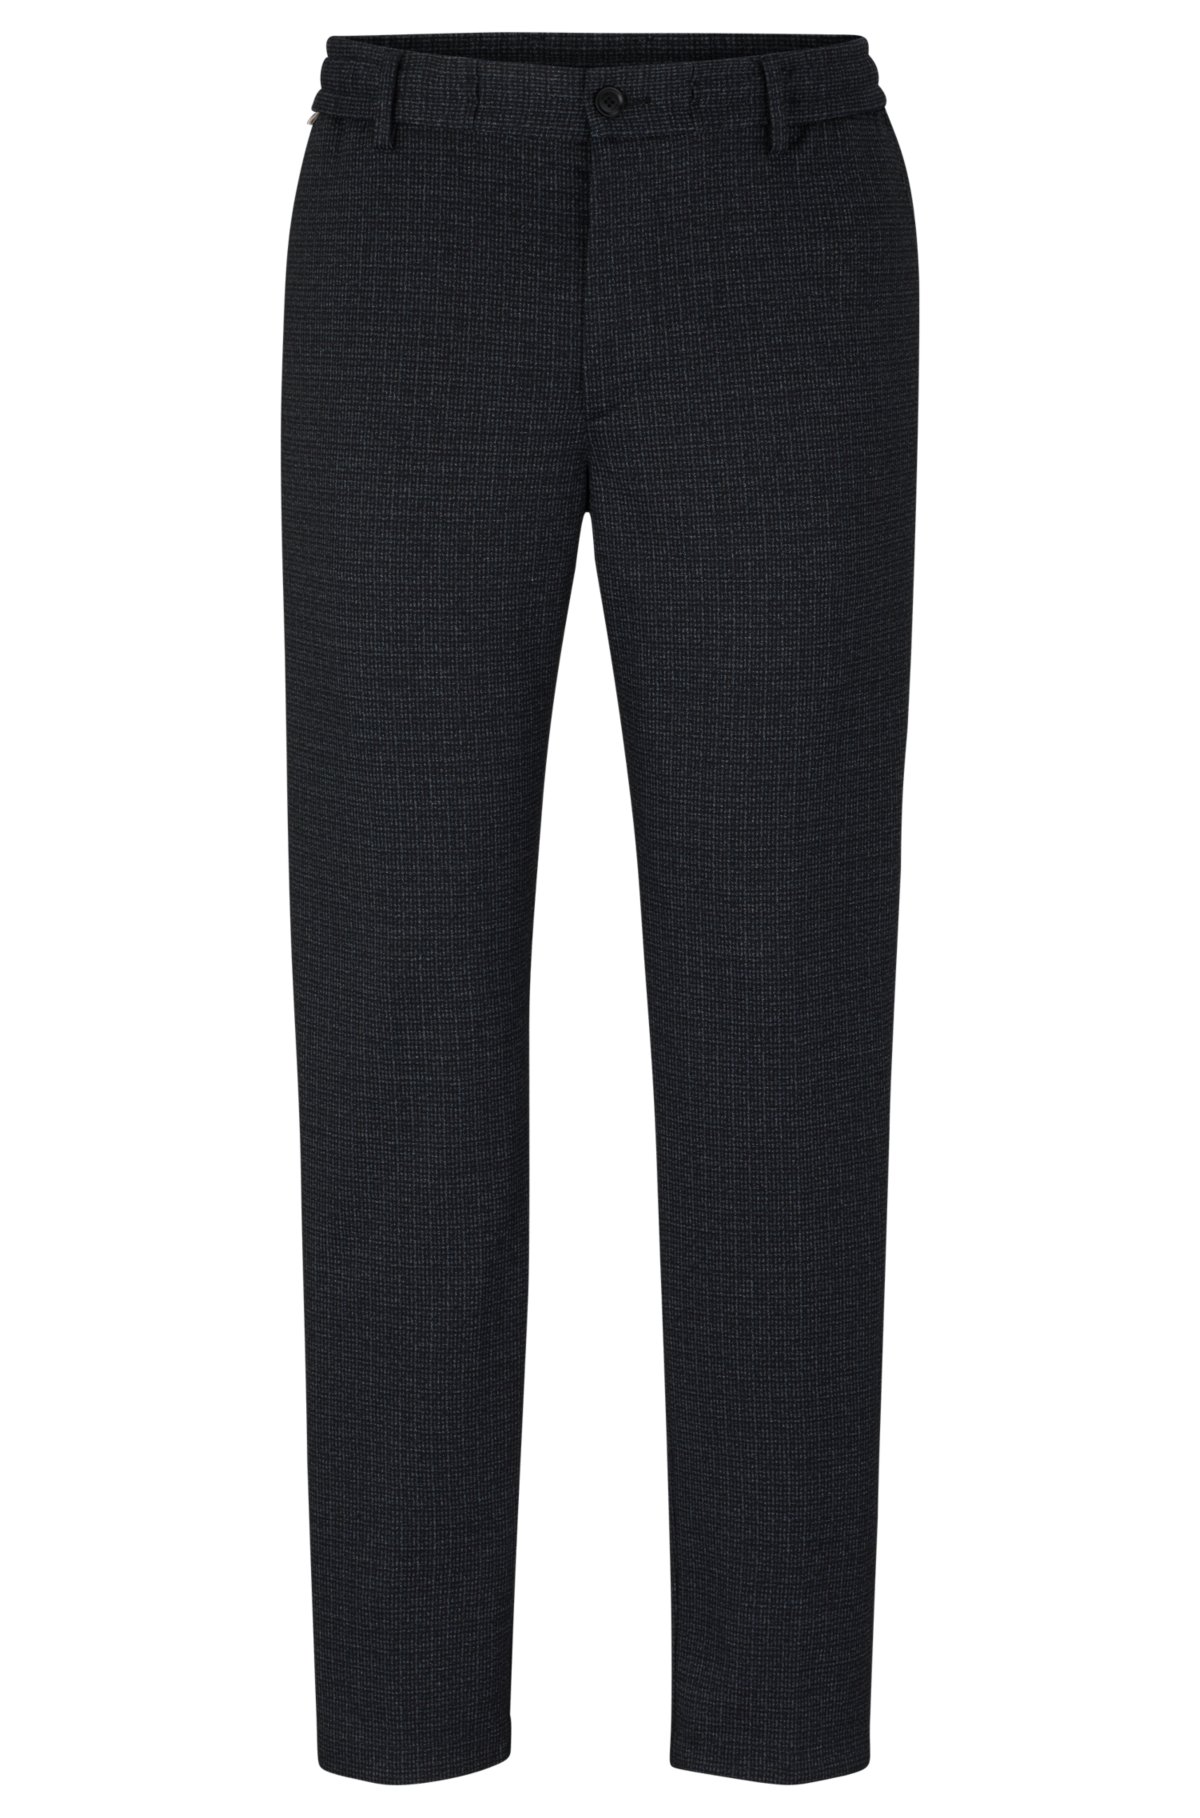 Regular tapered-fit trousers in patterned stretch jersey, Black